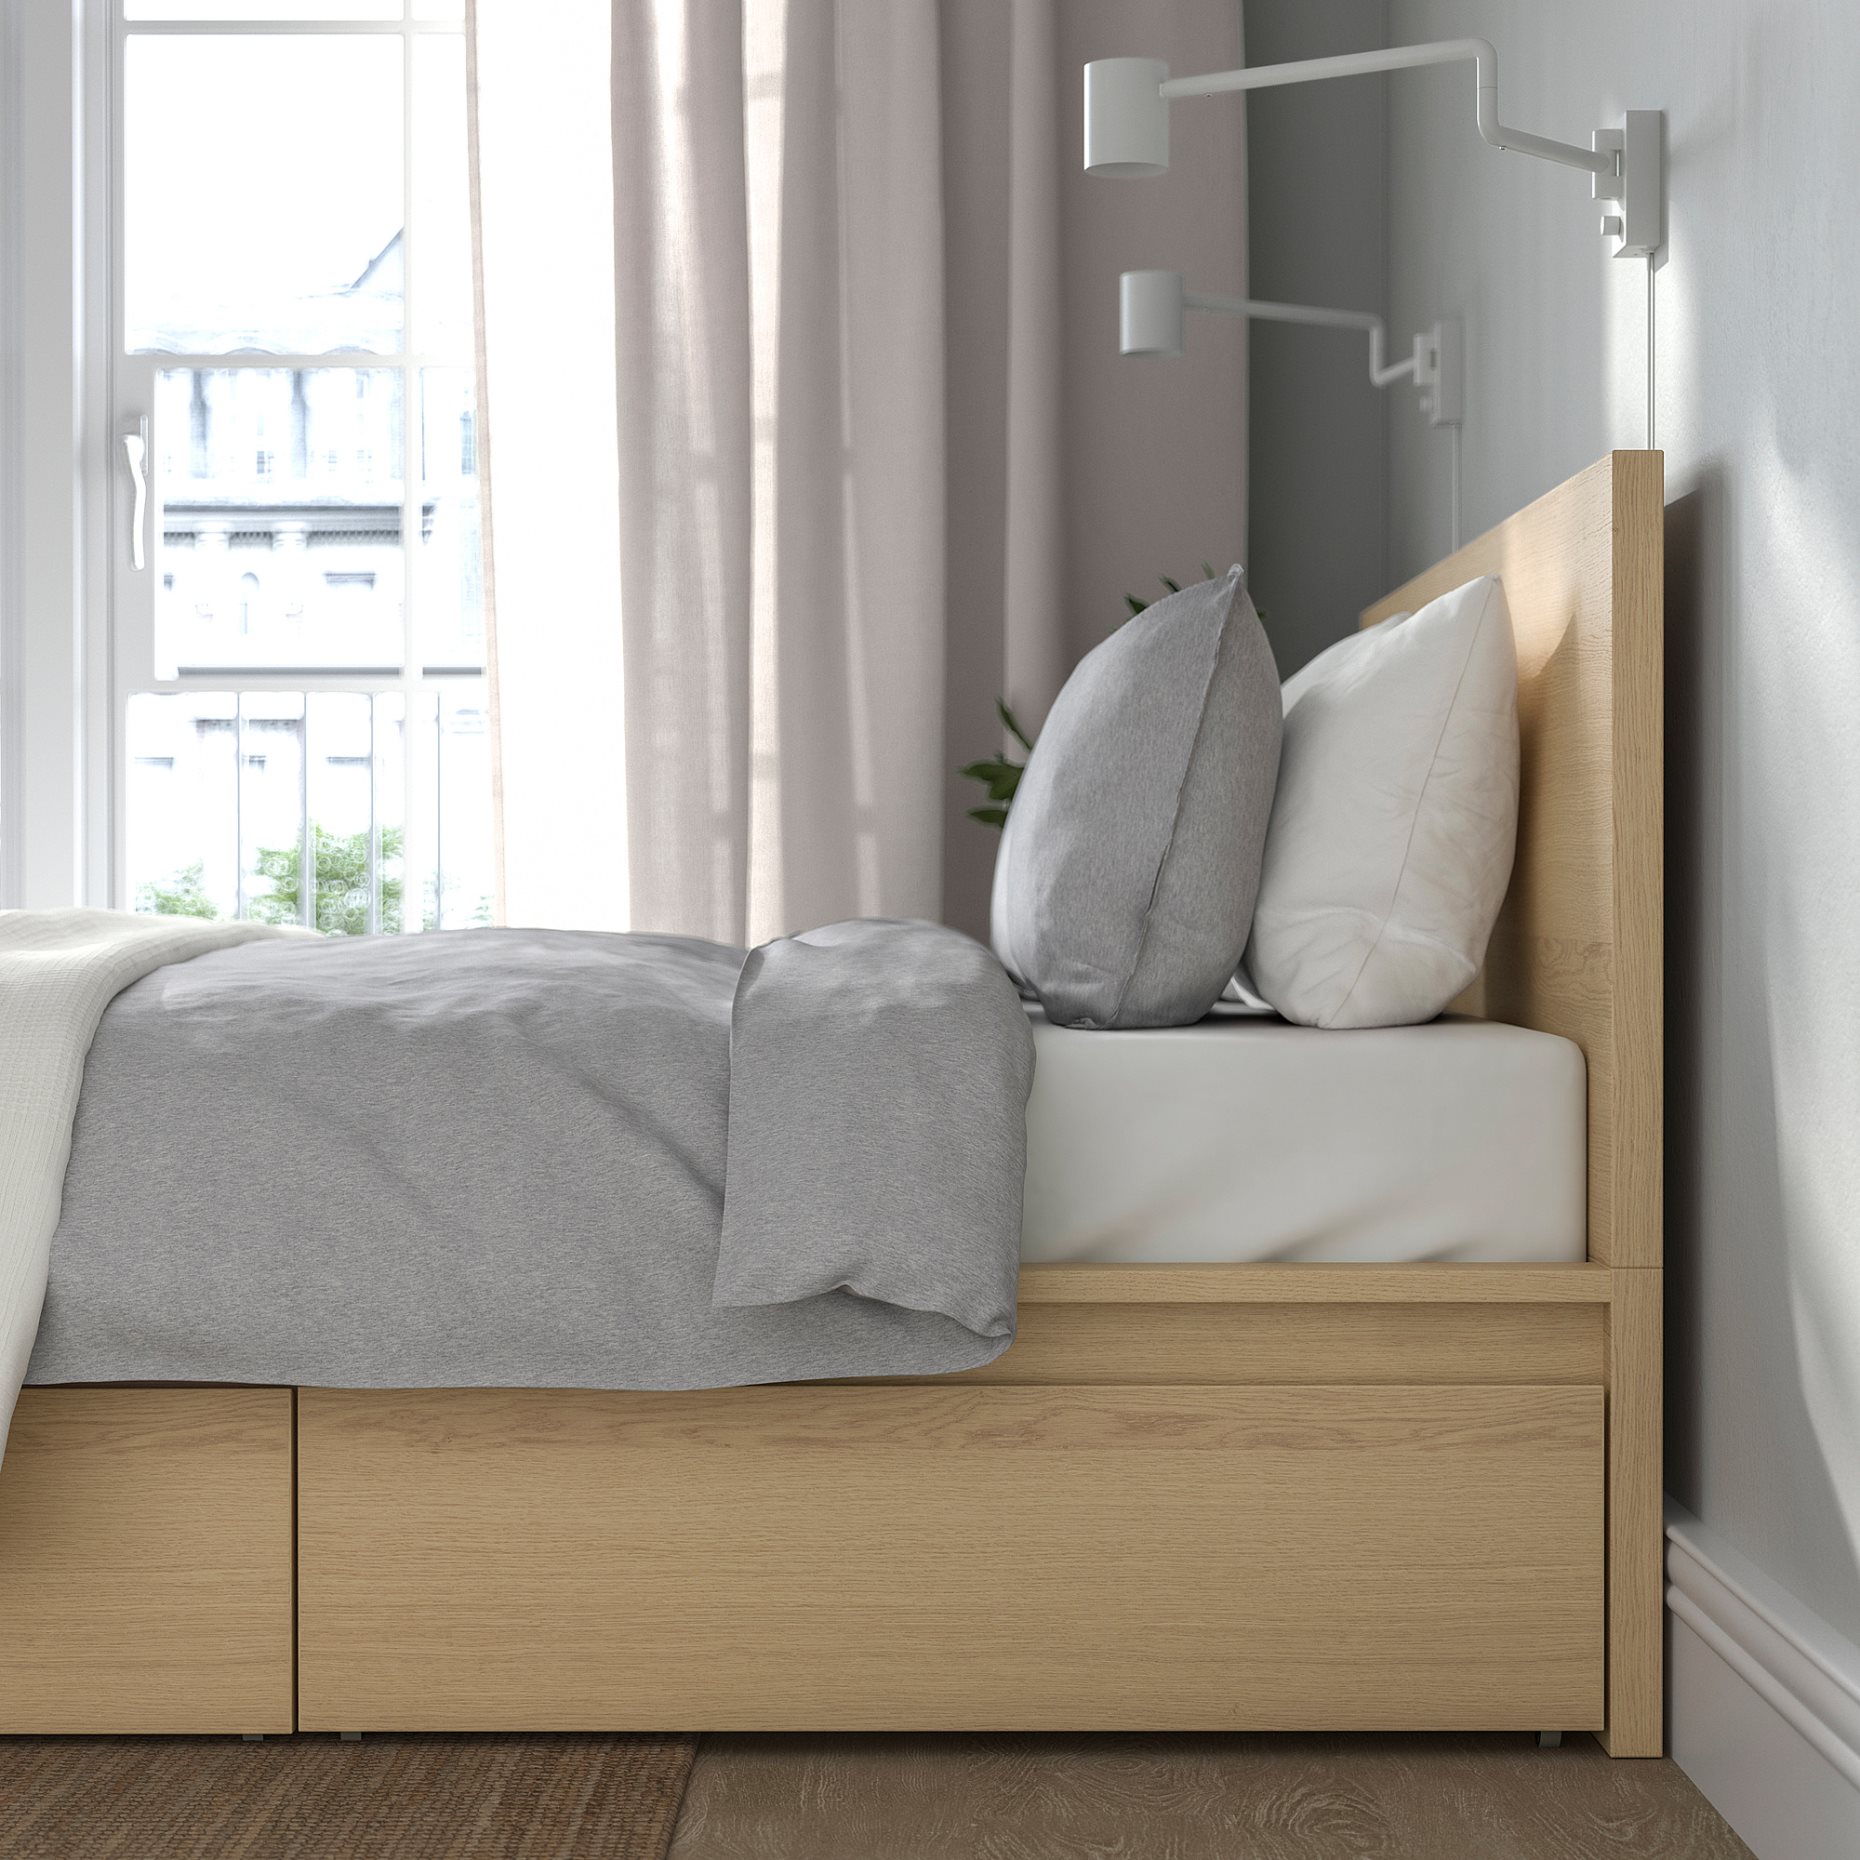 MALM, bed frame/high with 2 storage boxes, 180X200 cm, 191.766.12